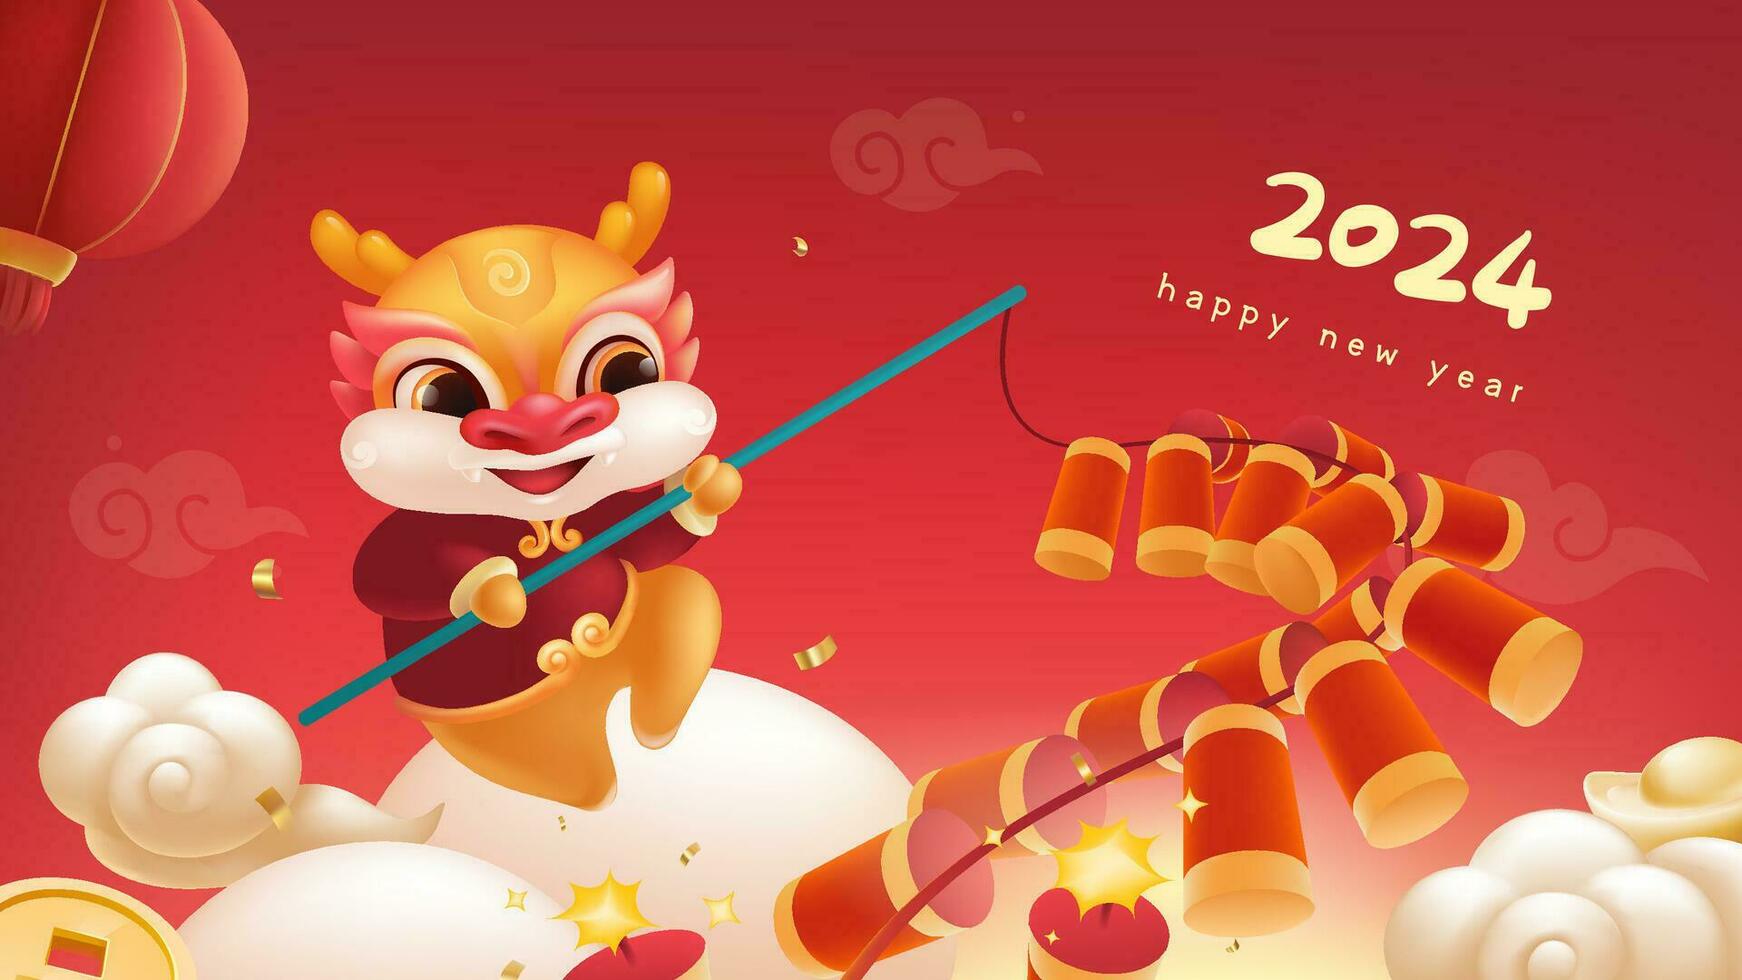 Spring Festival background design a lovely dragon is setting off firecrackers vector